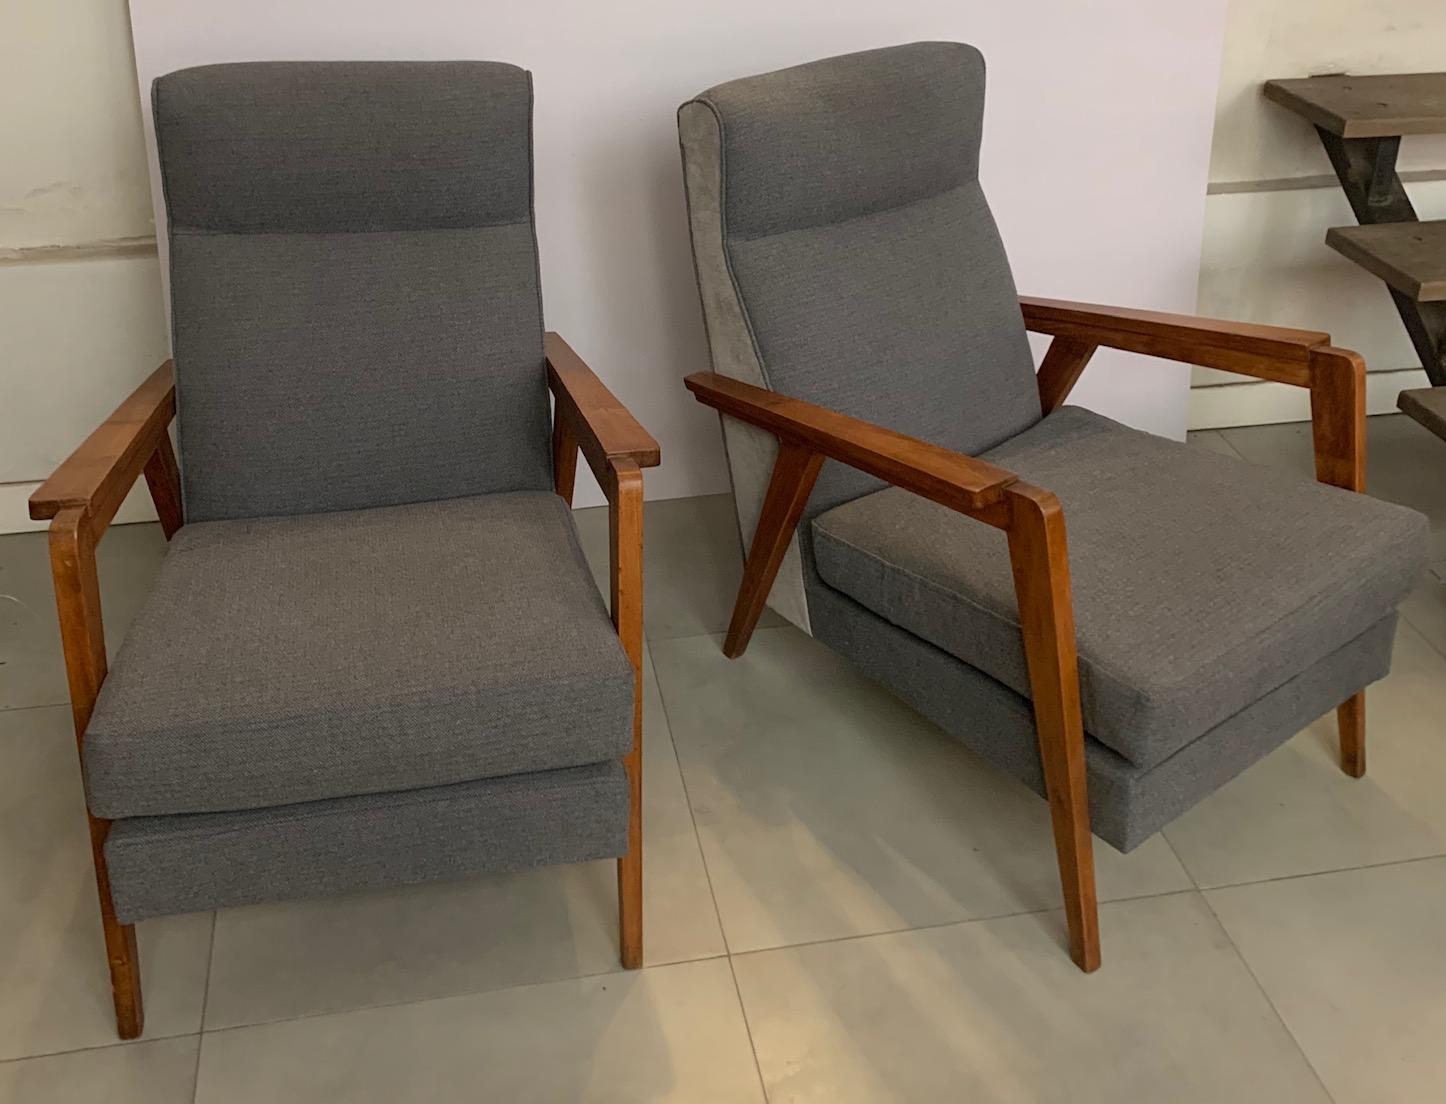 Pair of French armchairs in oakwood 1950s design, these armchairs have been reupholstered in a white wool fabric in two colors.